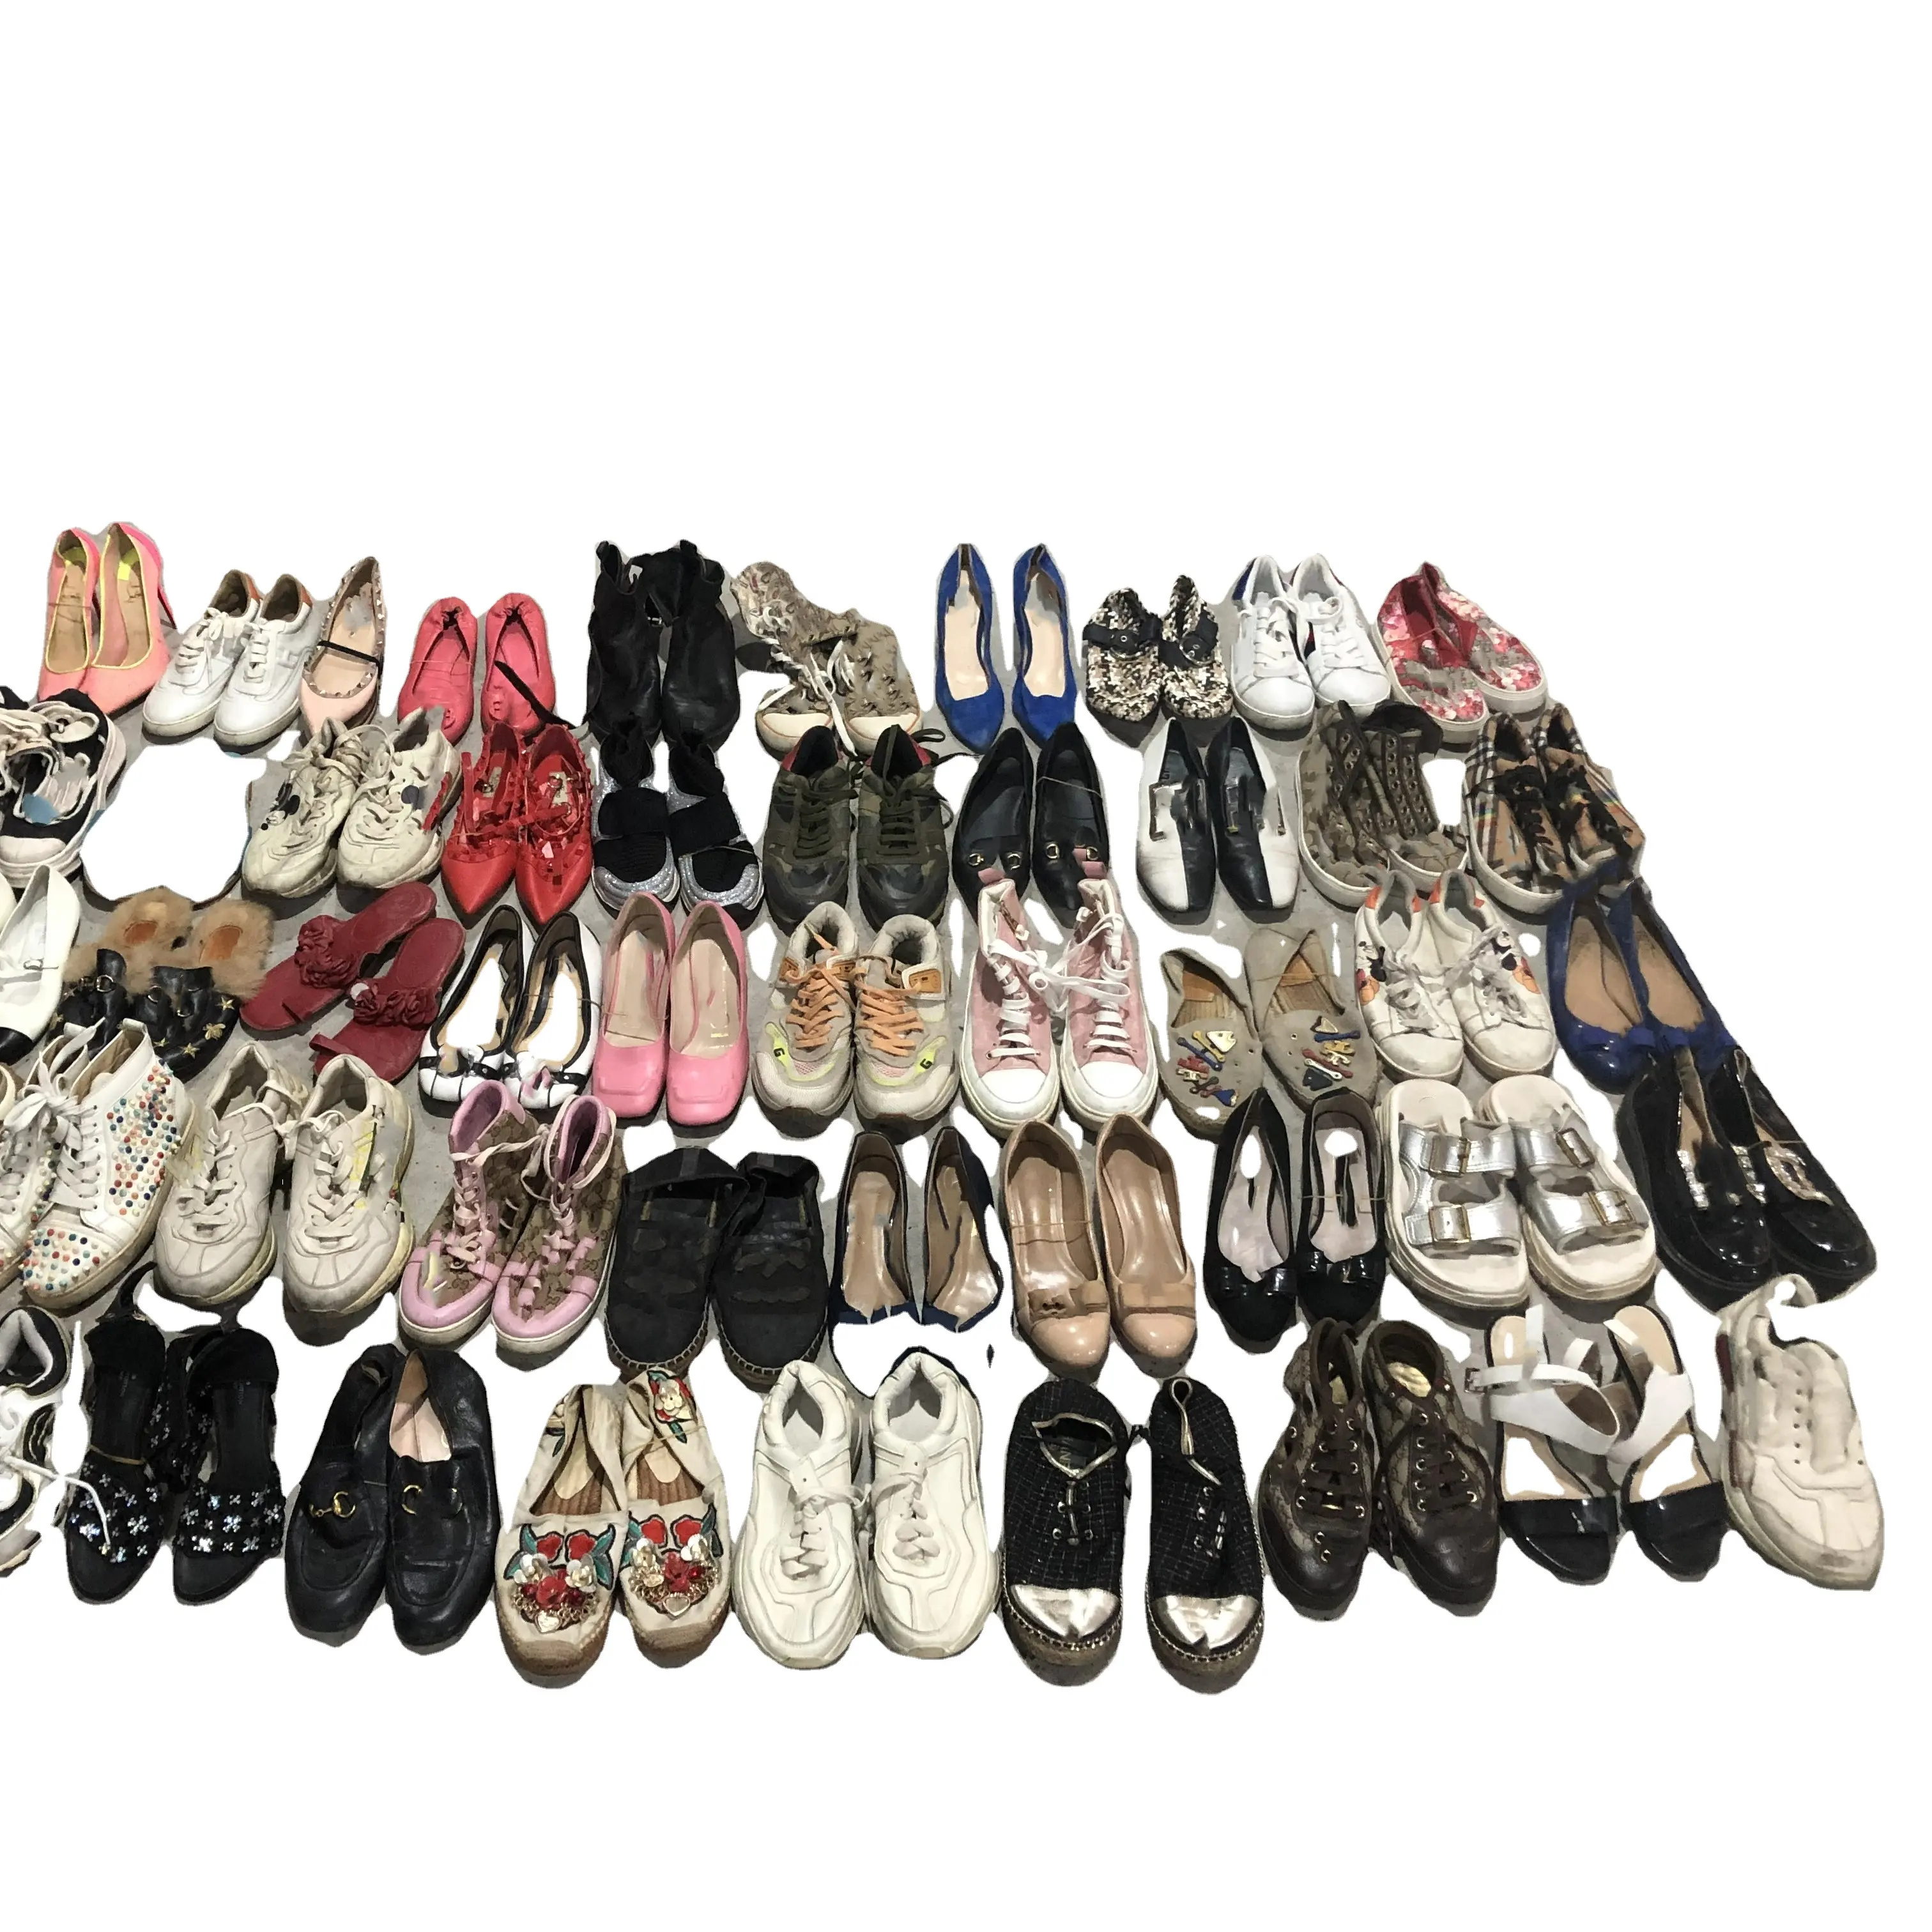 Second Hand Branded Shoes A Variety Of Styles And Colors Mixed Used Luxury Women Shoes In Box